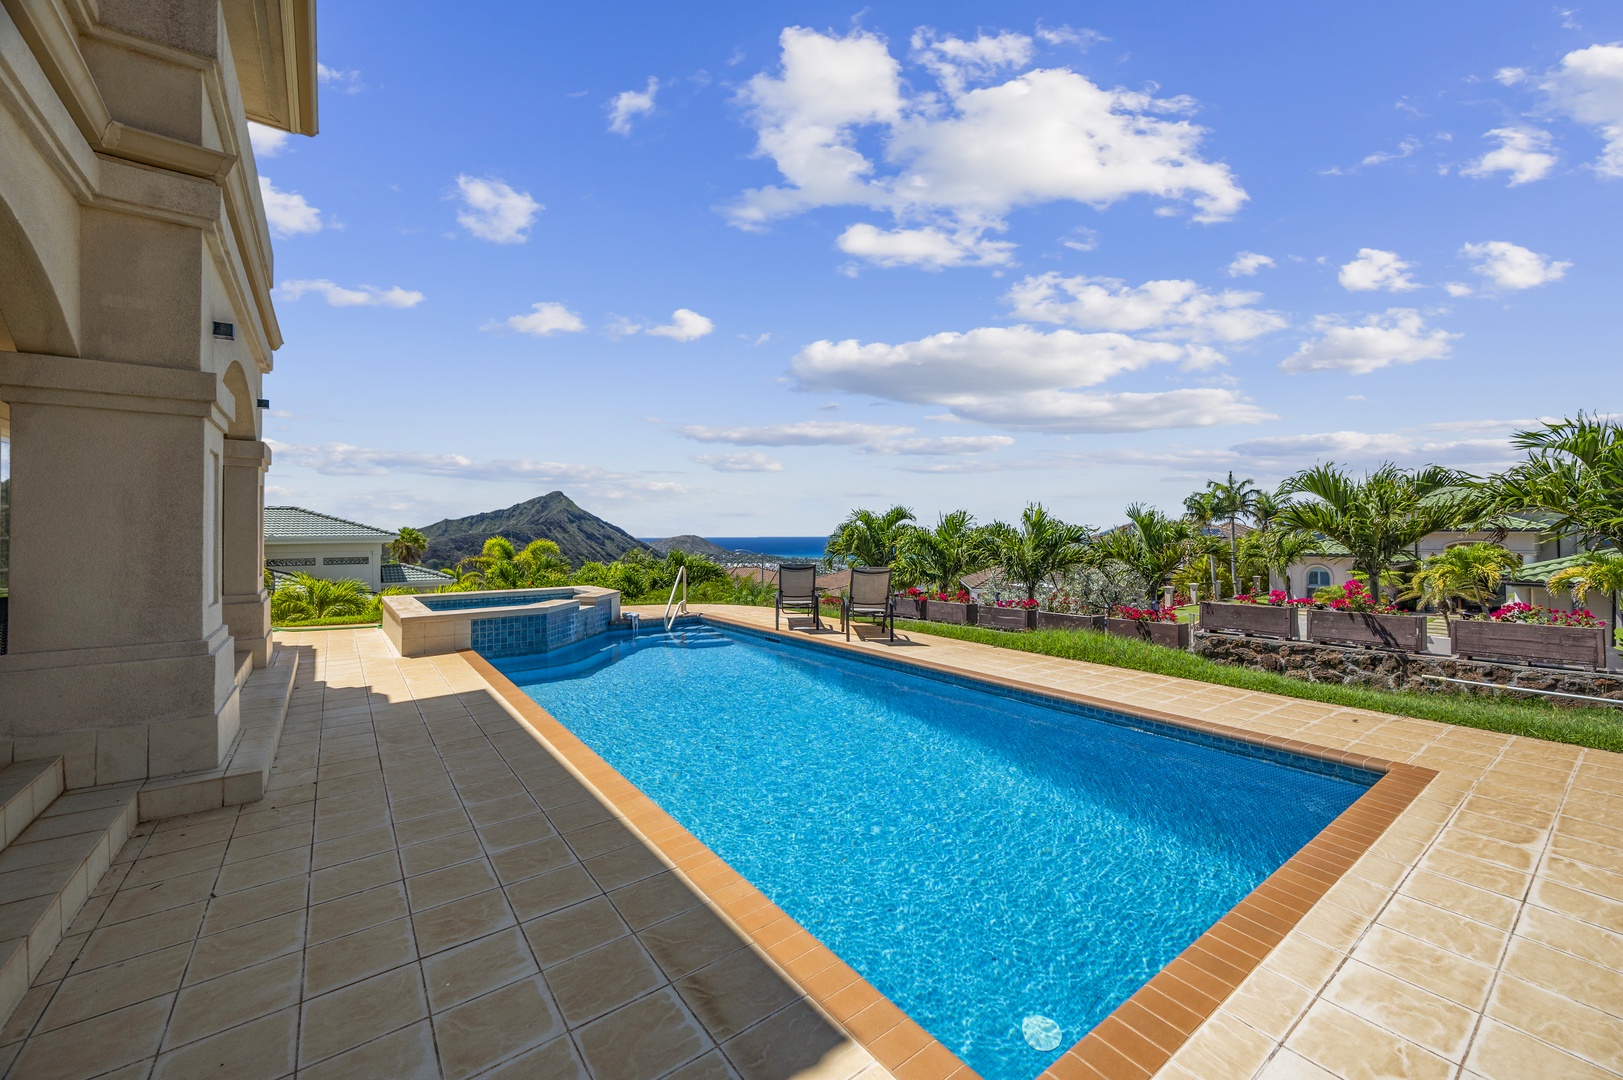 Honolulu Vacation Rentals, Lotus on a Hill* - Take a refreshing dip in your private pool, complete with ocean and mountain views